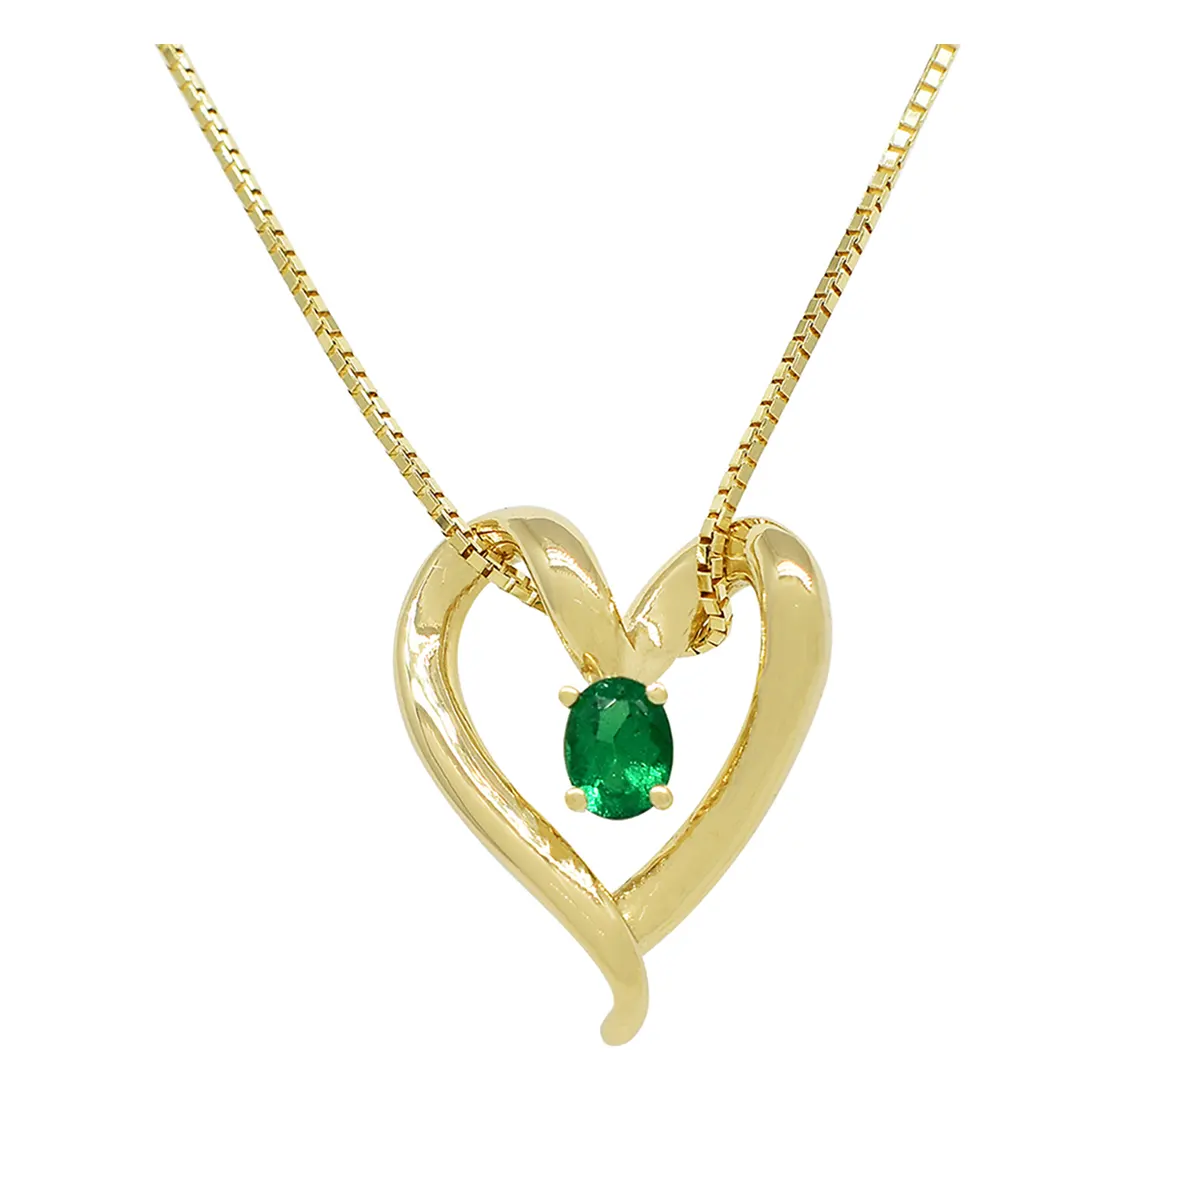 yellow-gold-heart-shaped-necklace-with-oval-shape-natural-emerald